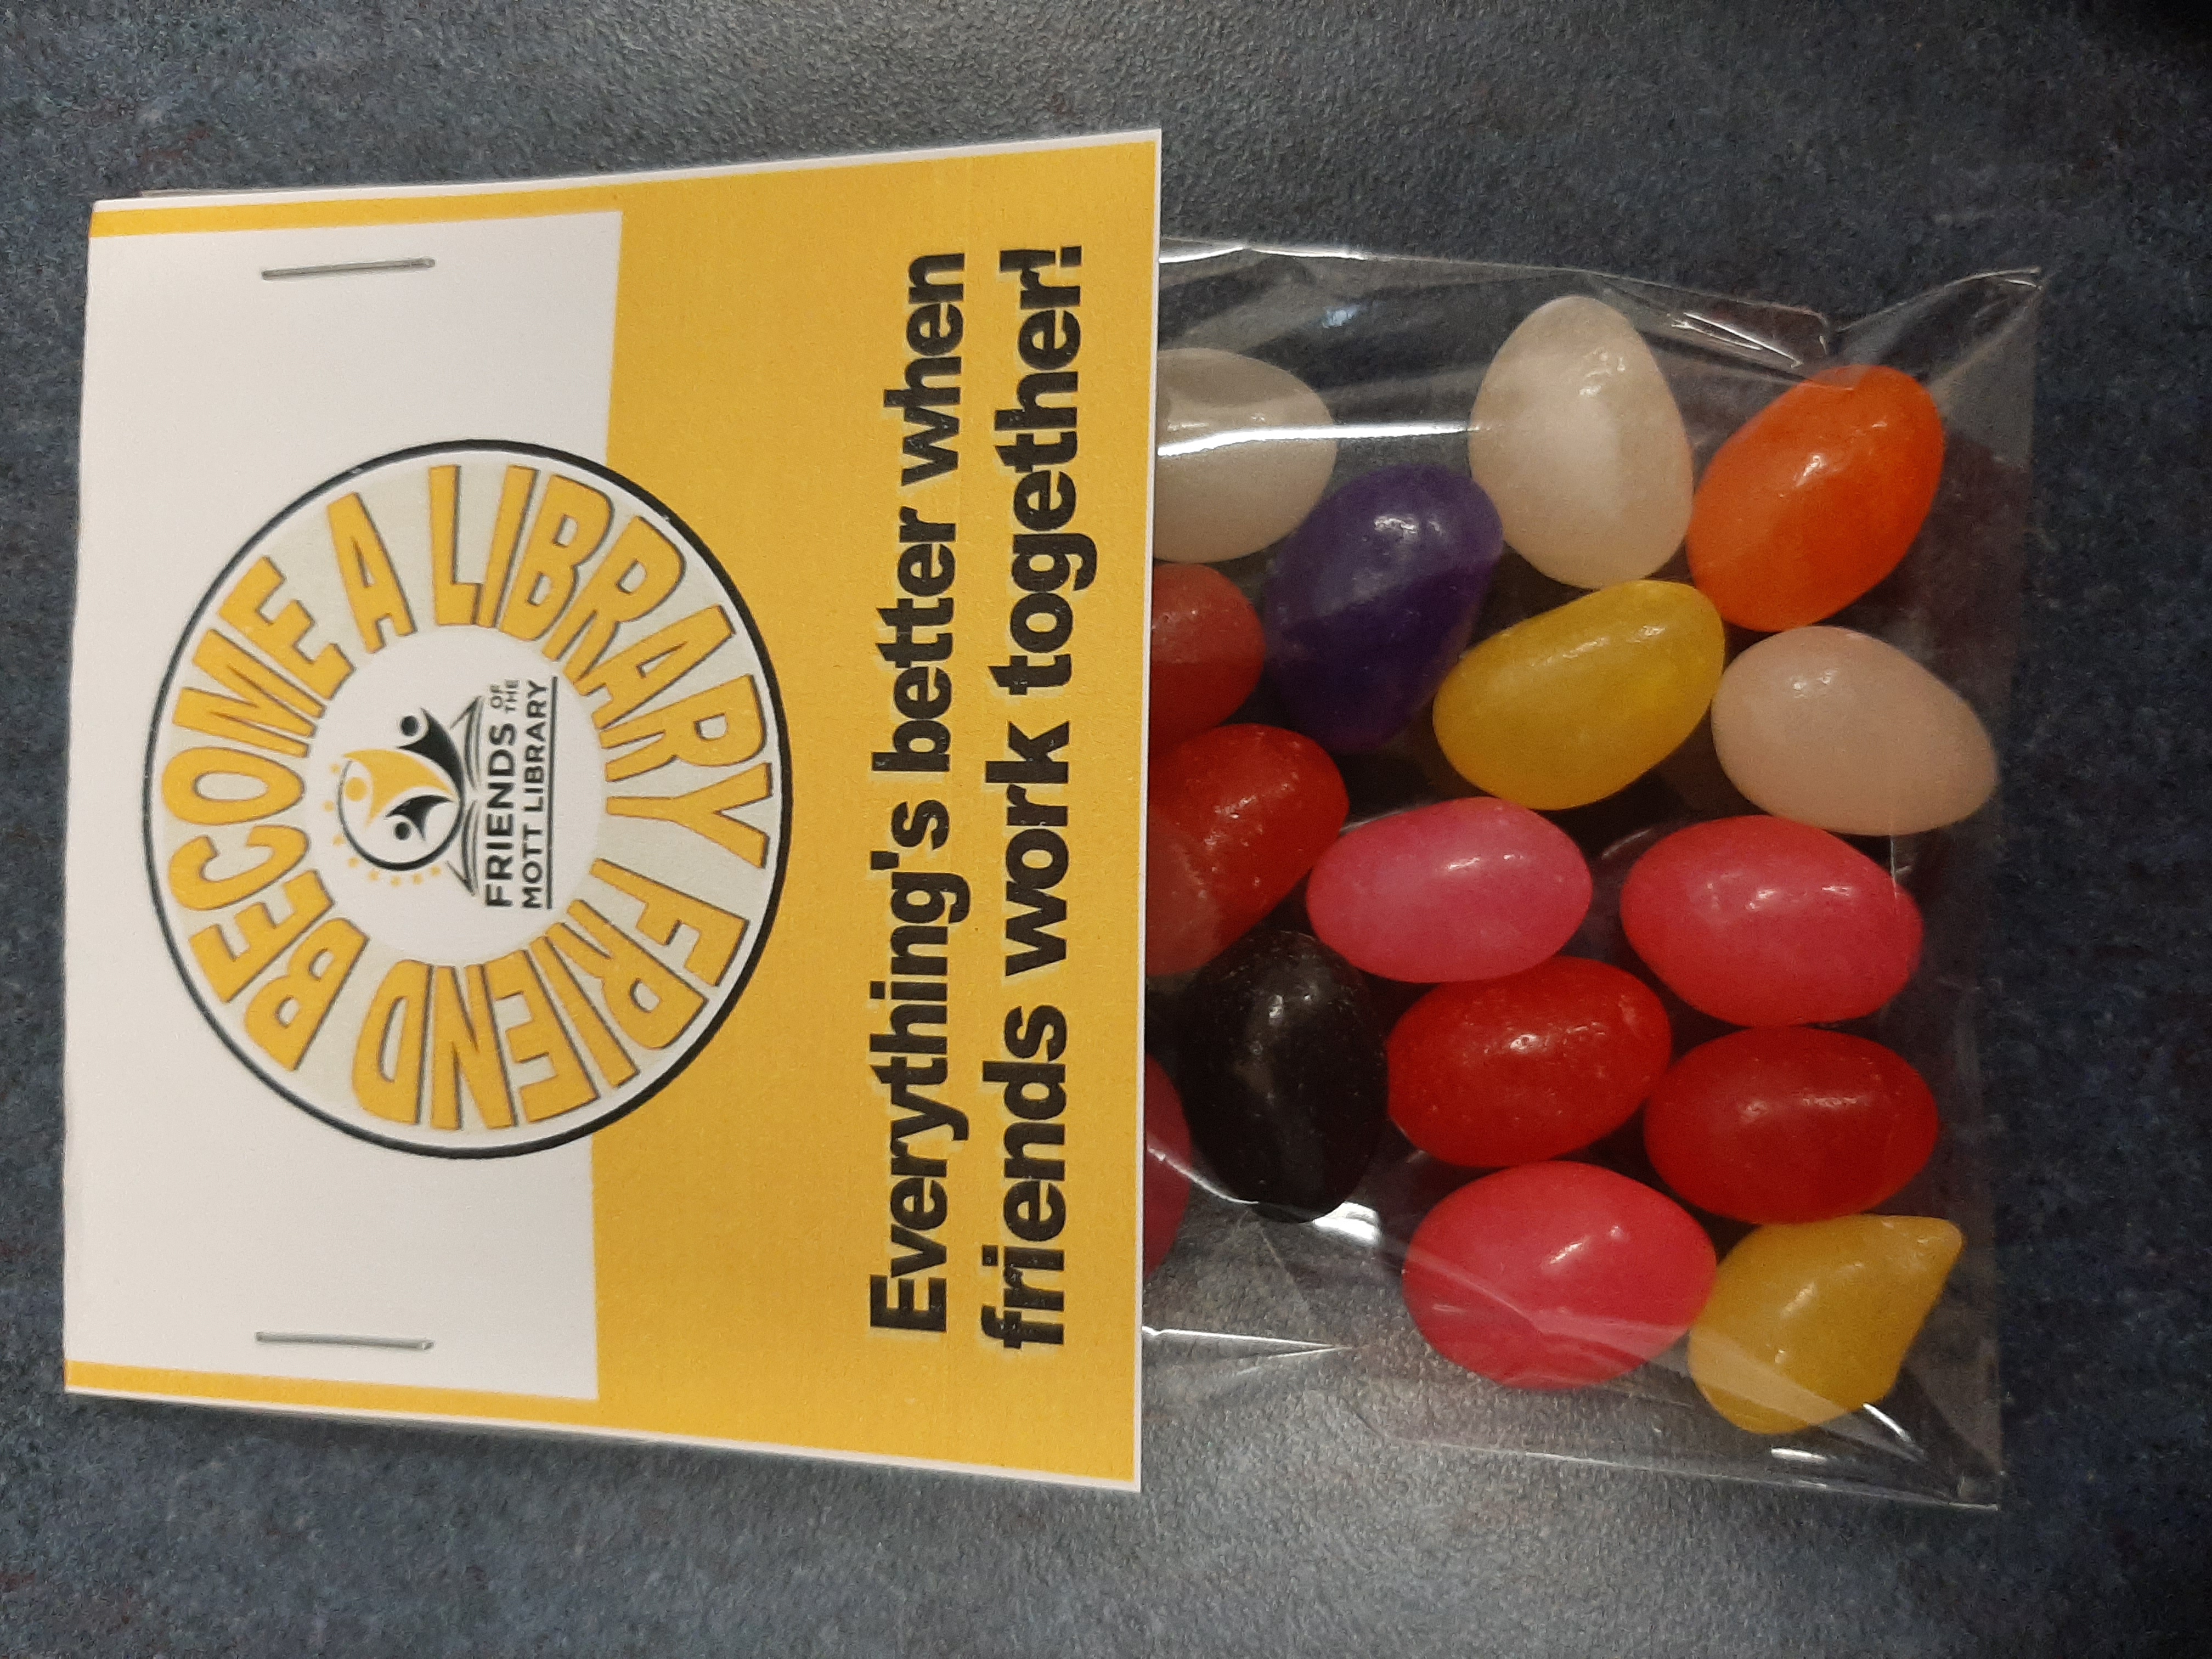 Bag of Jellybeans with text Become a Library Friend